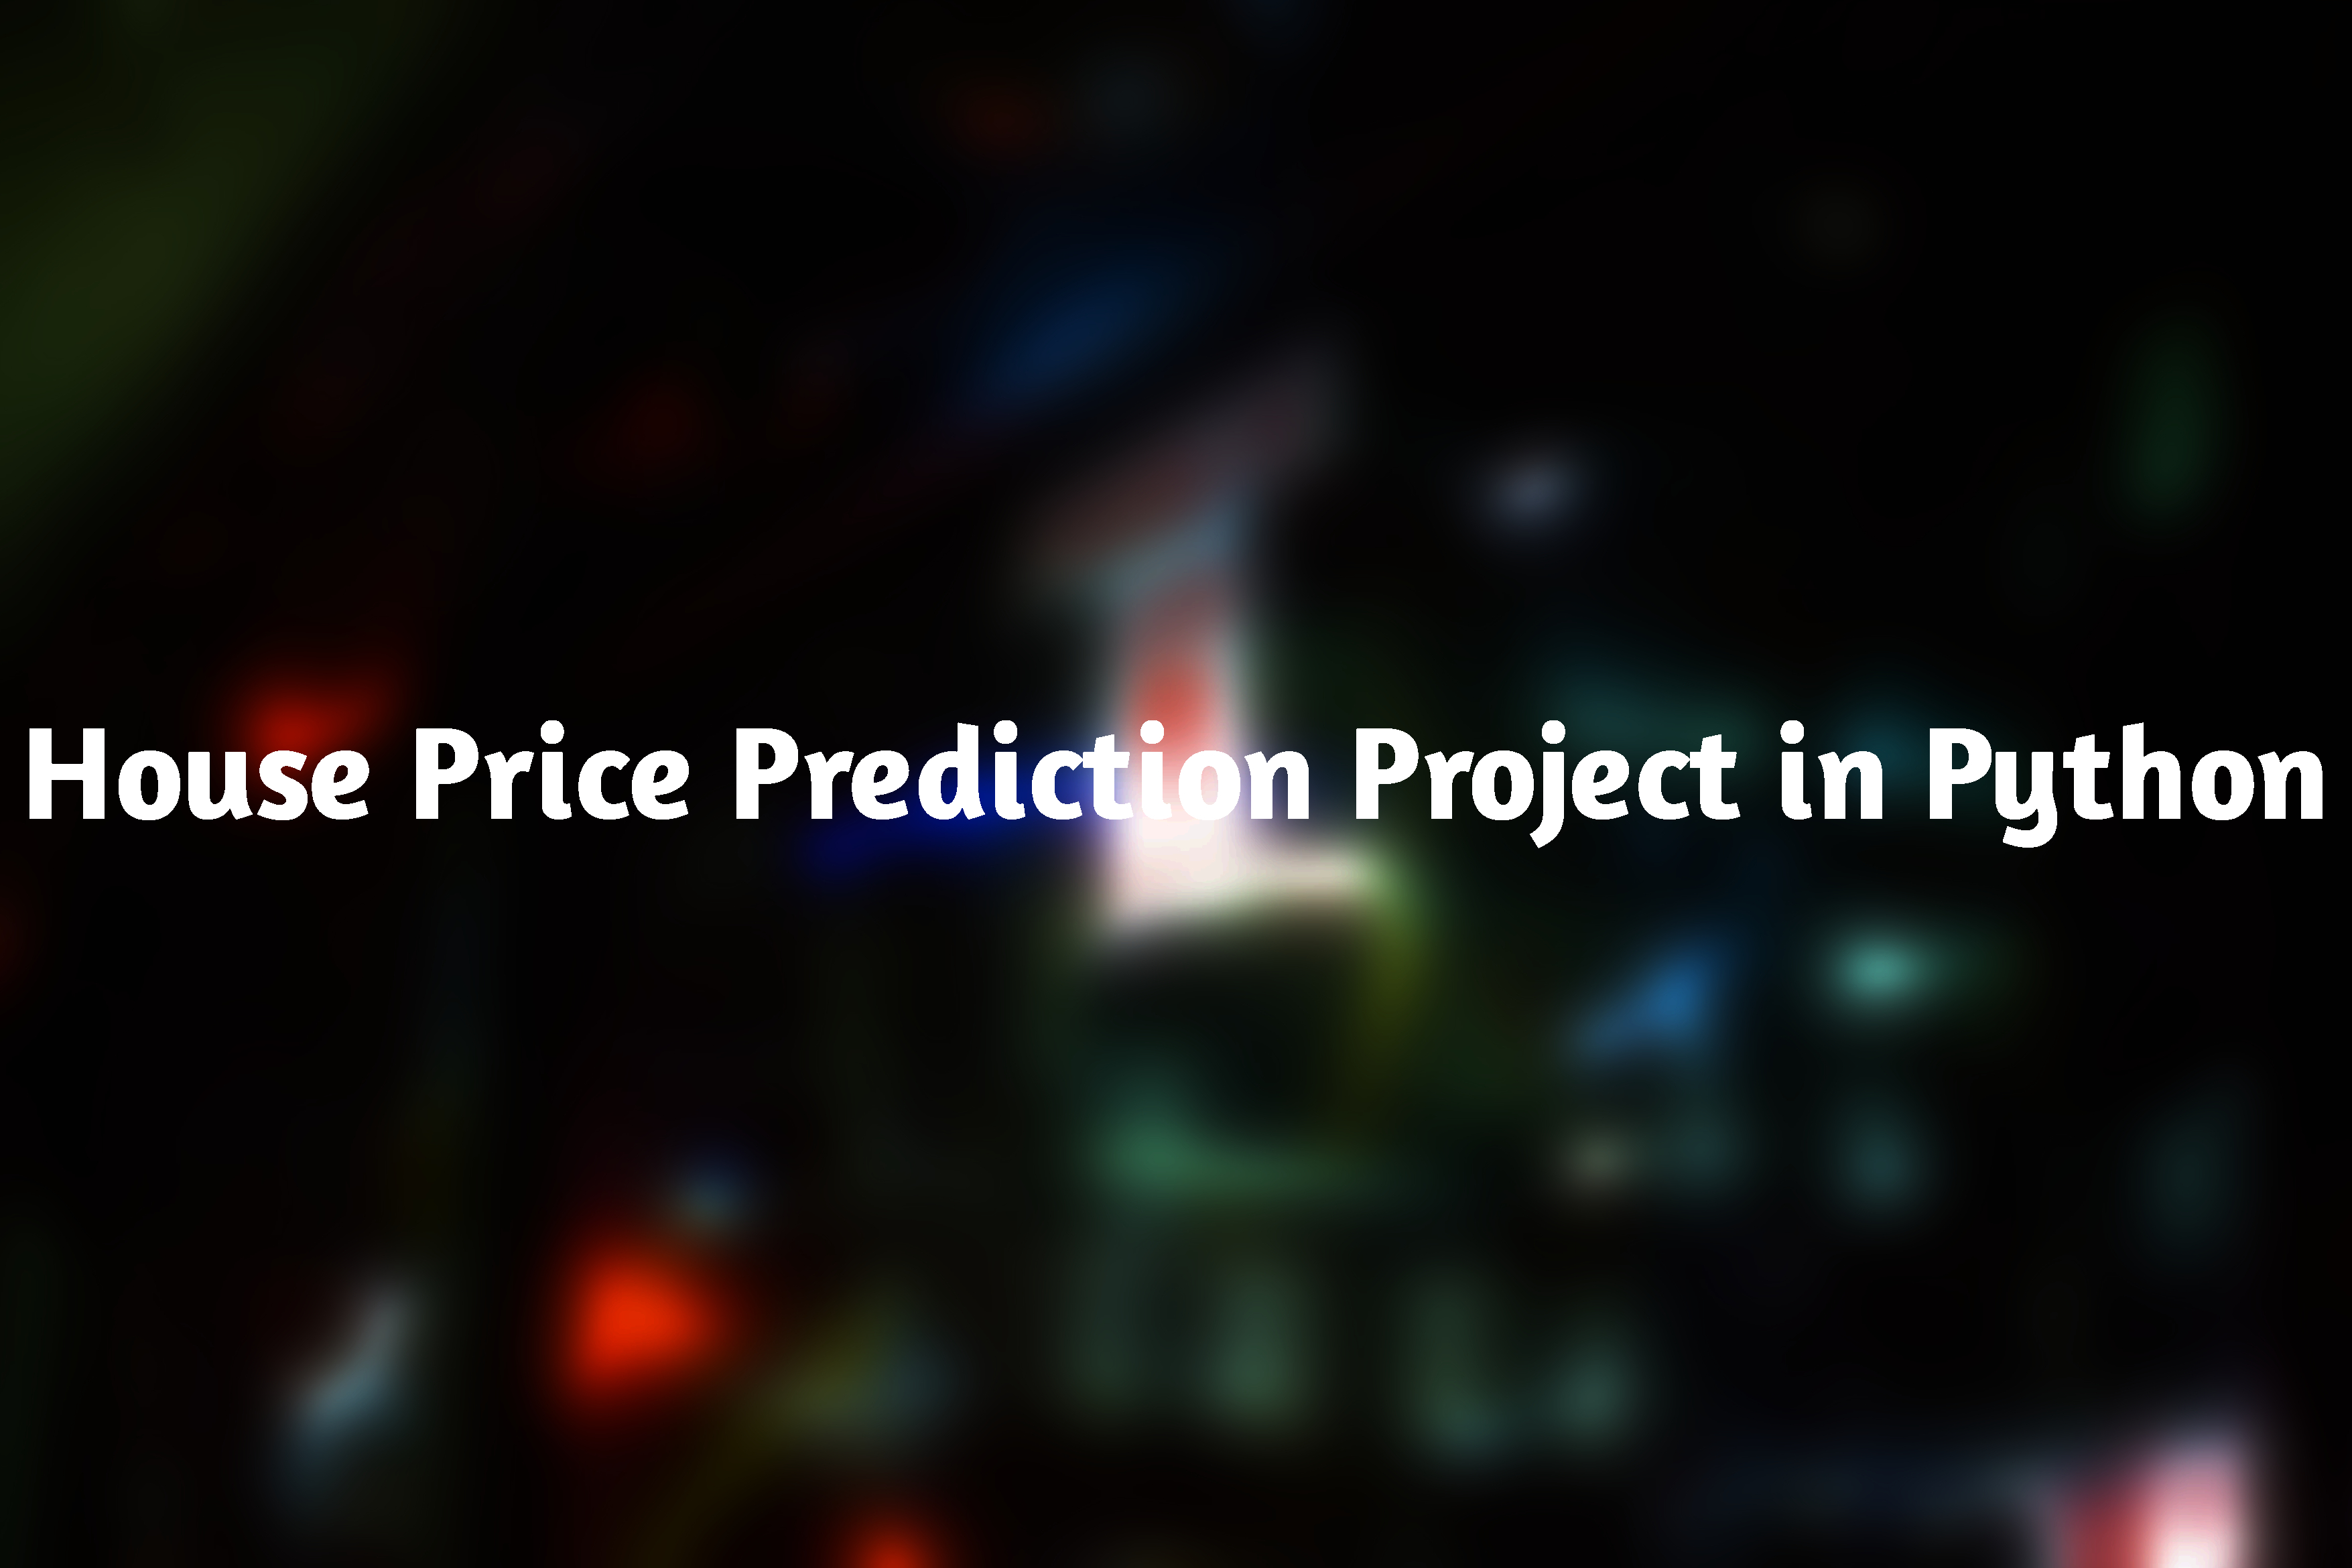 House Price Prediction Project in Python